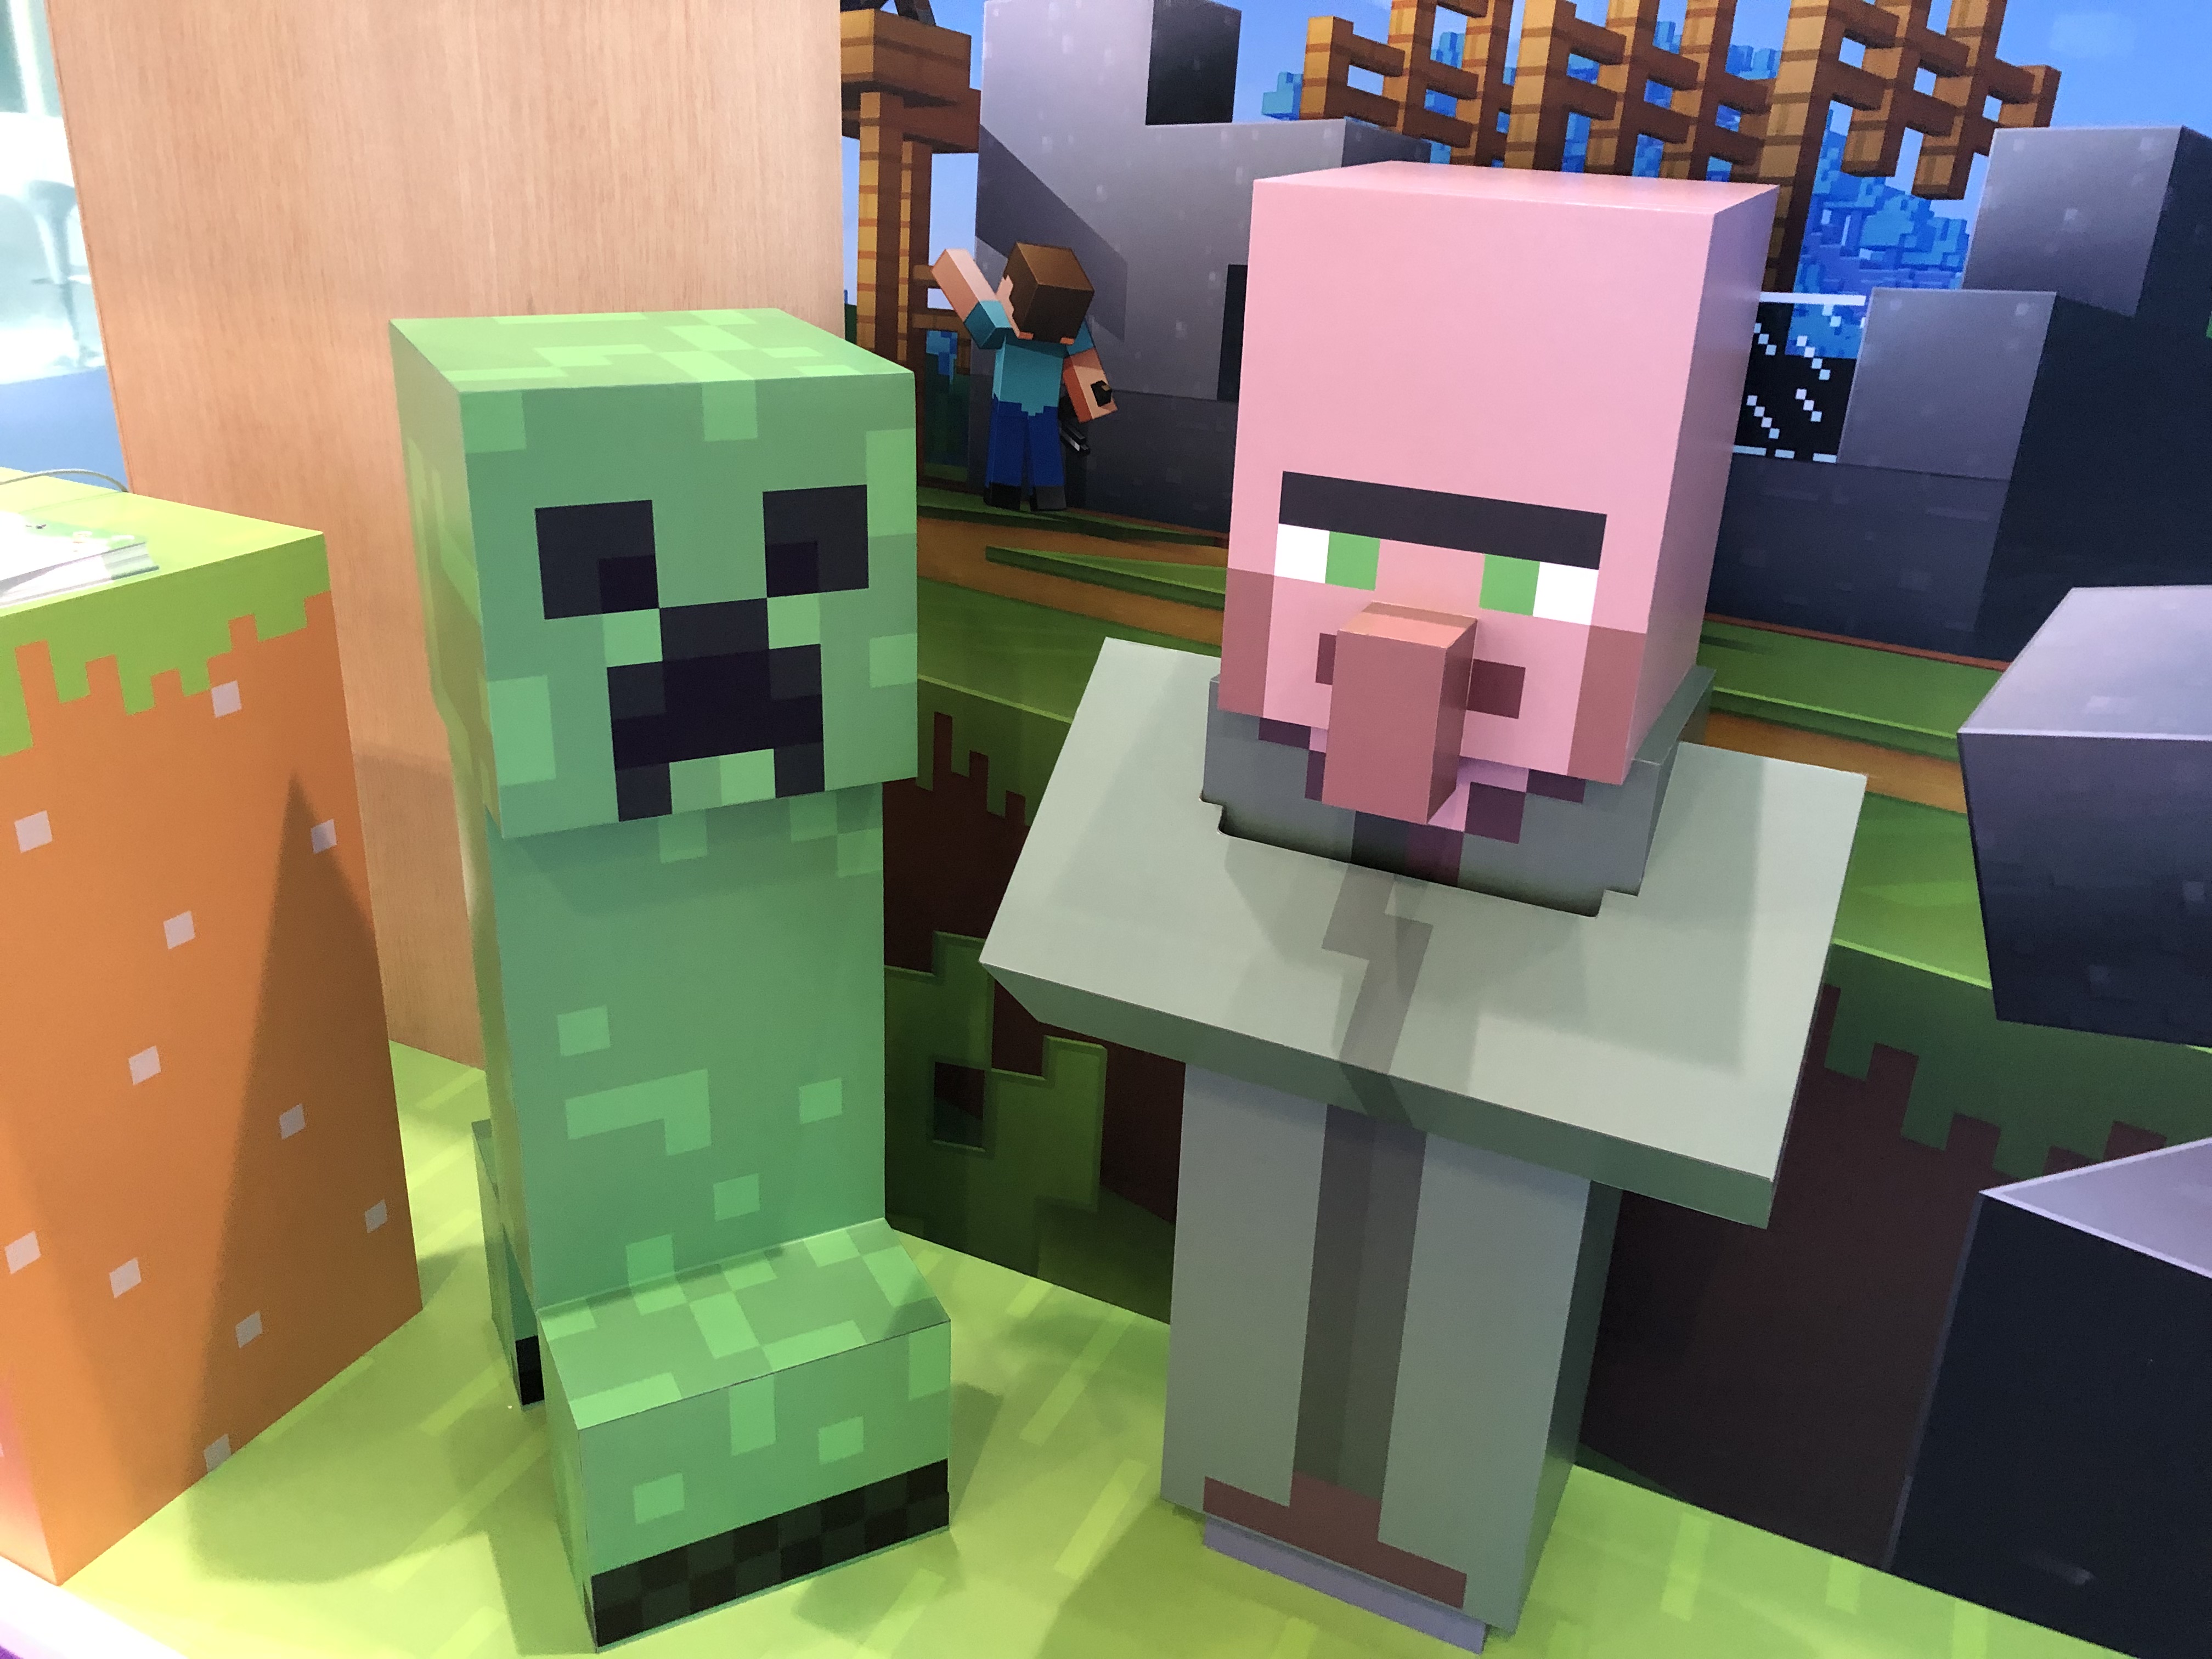 A Creeper and a Villager outside the Minecraft stand